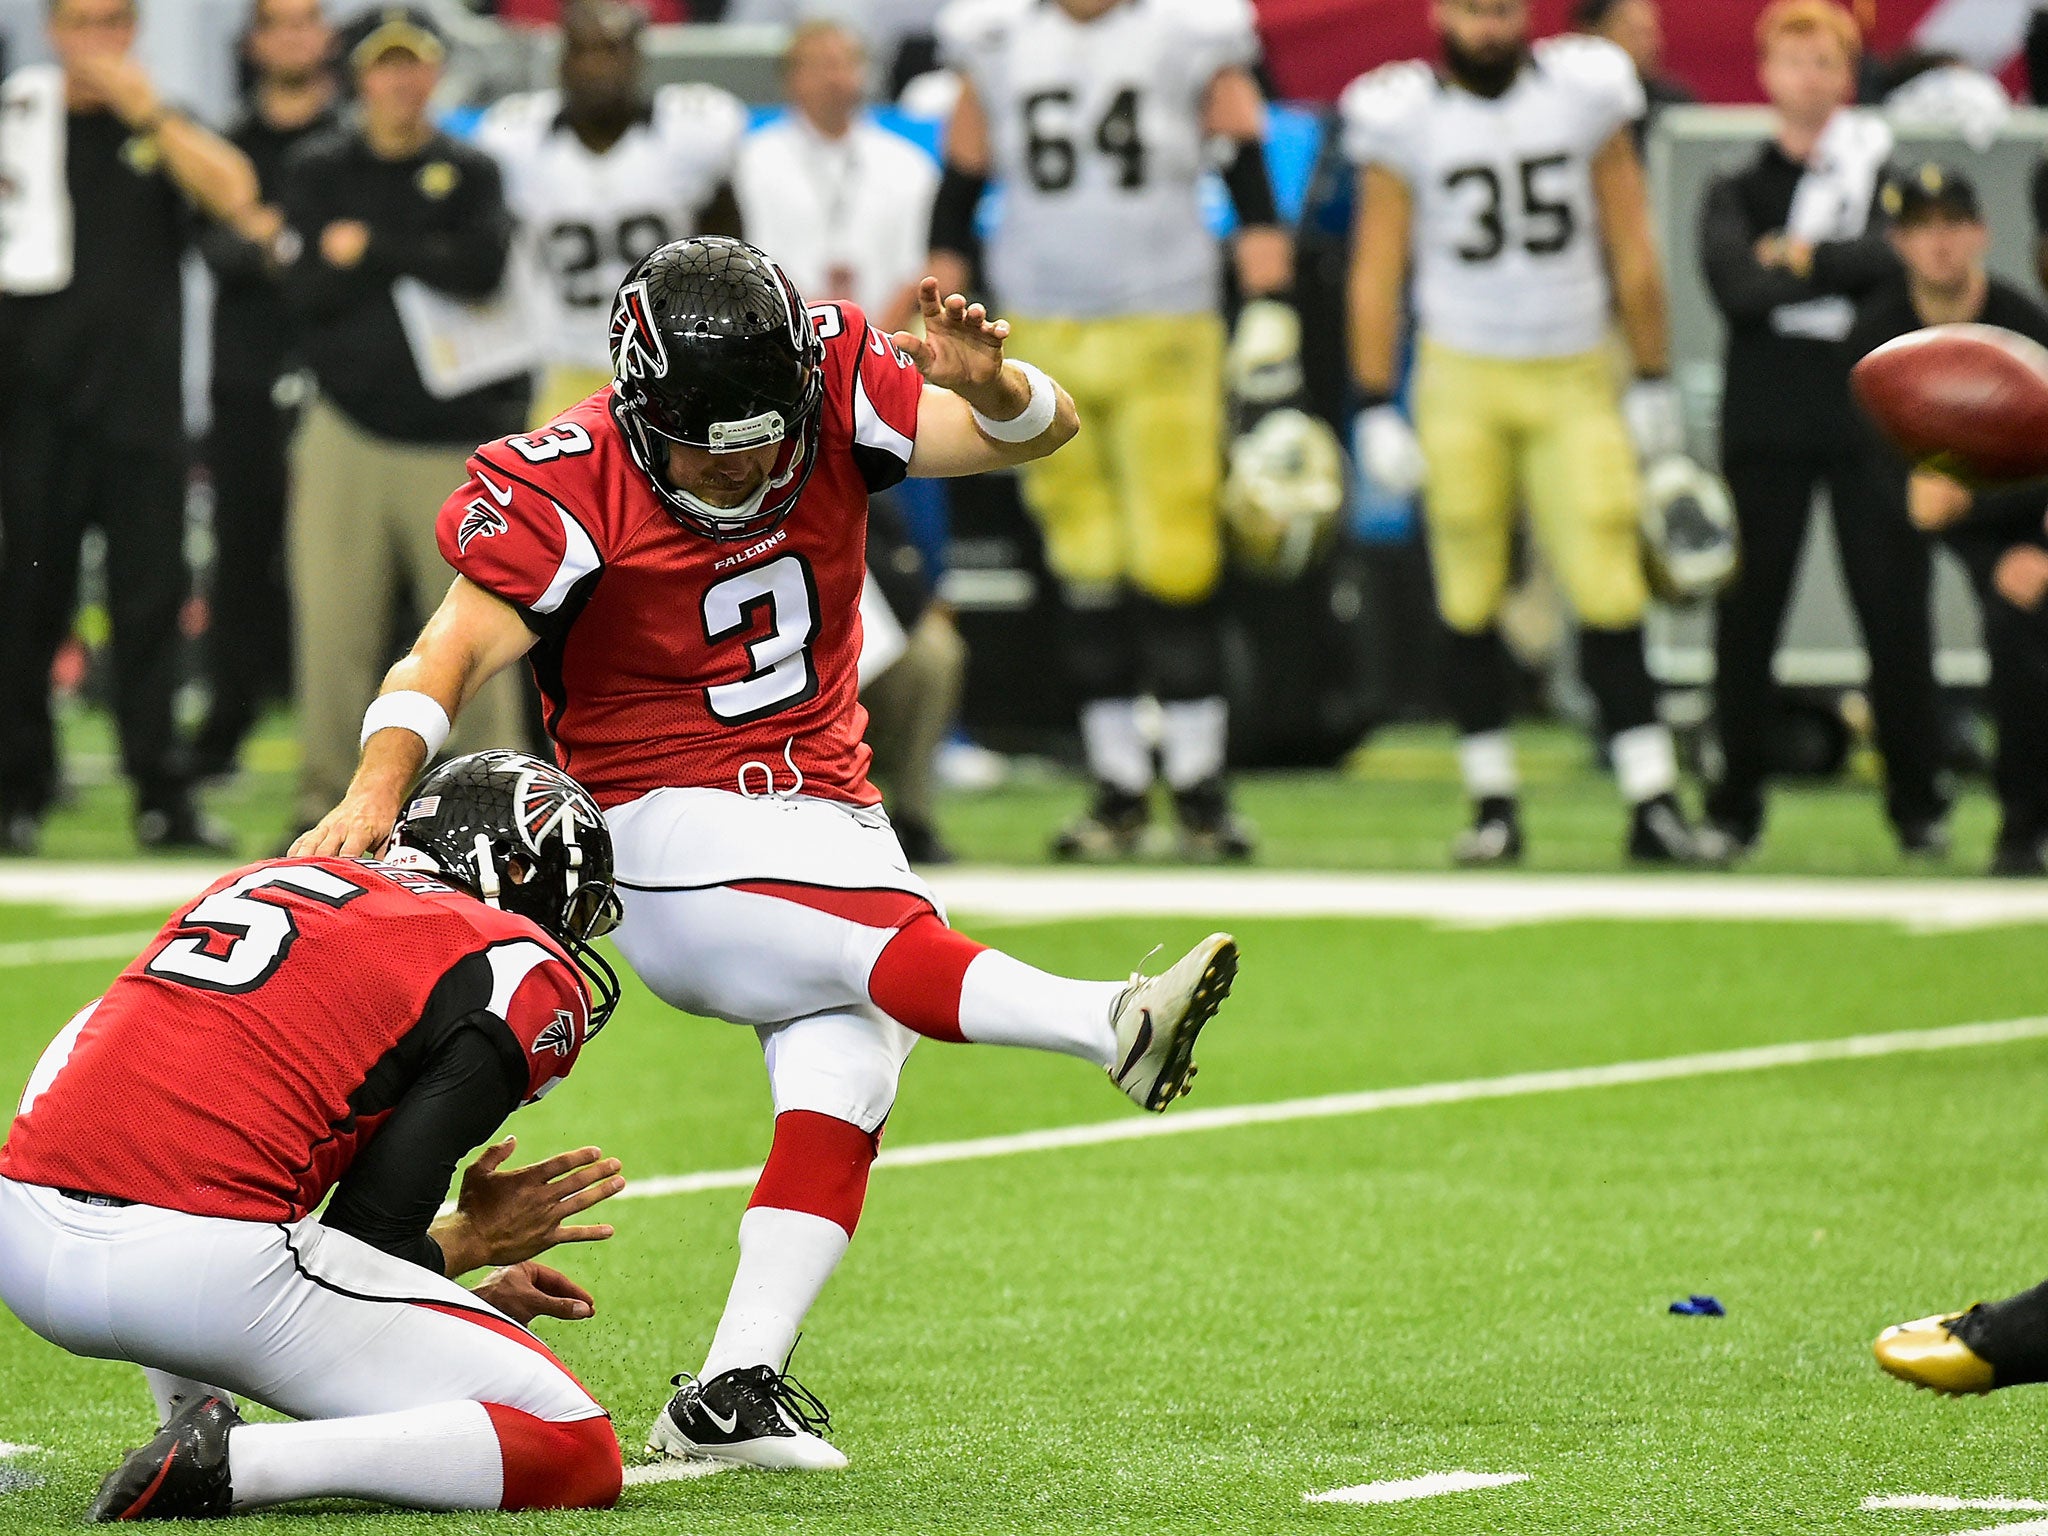 Matt Bryant kicked an overtime field-goal to see the Atlanta Falcons defeat the New Orleans Saints 37-34